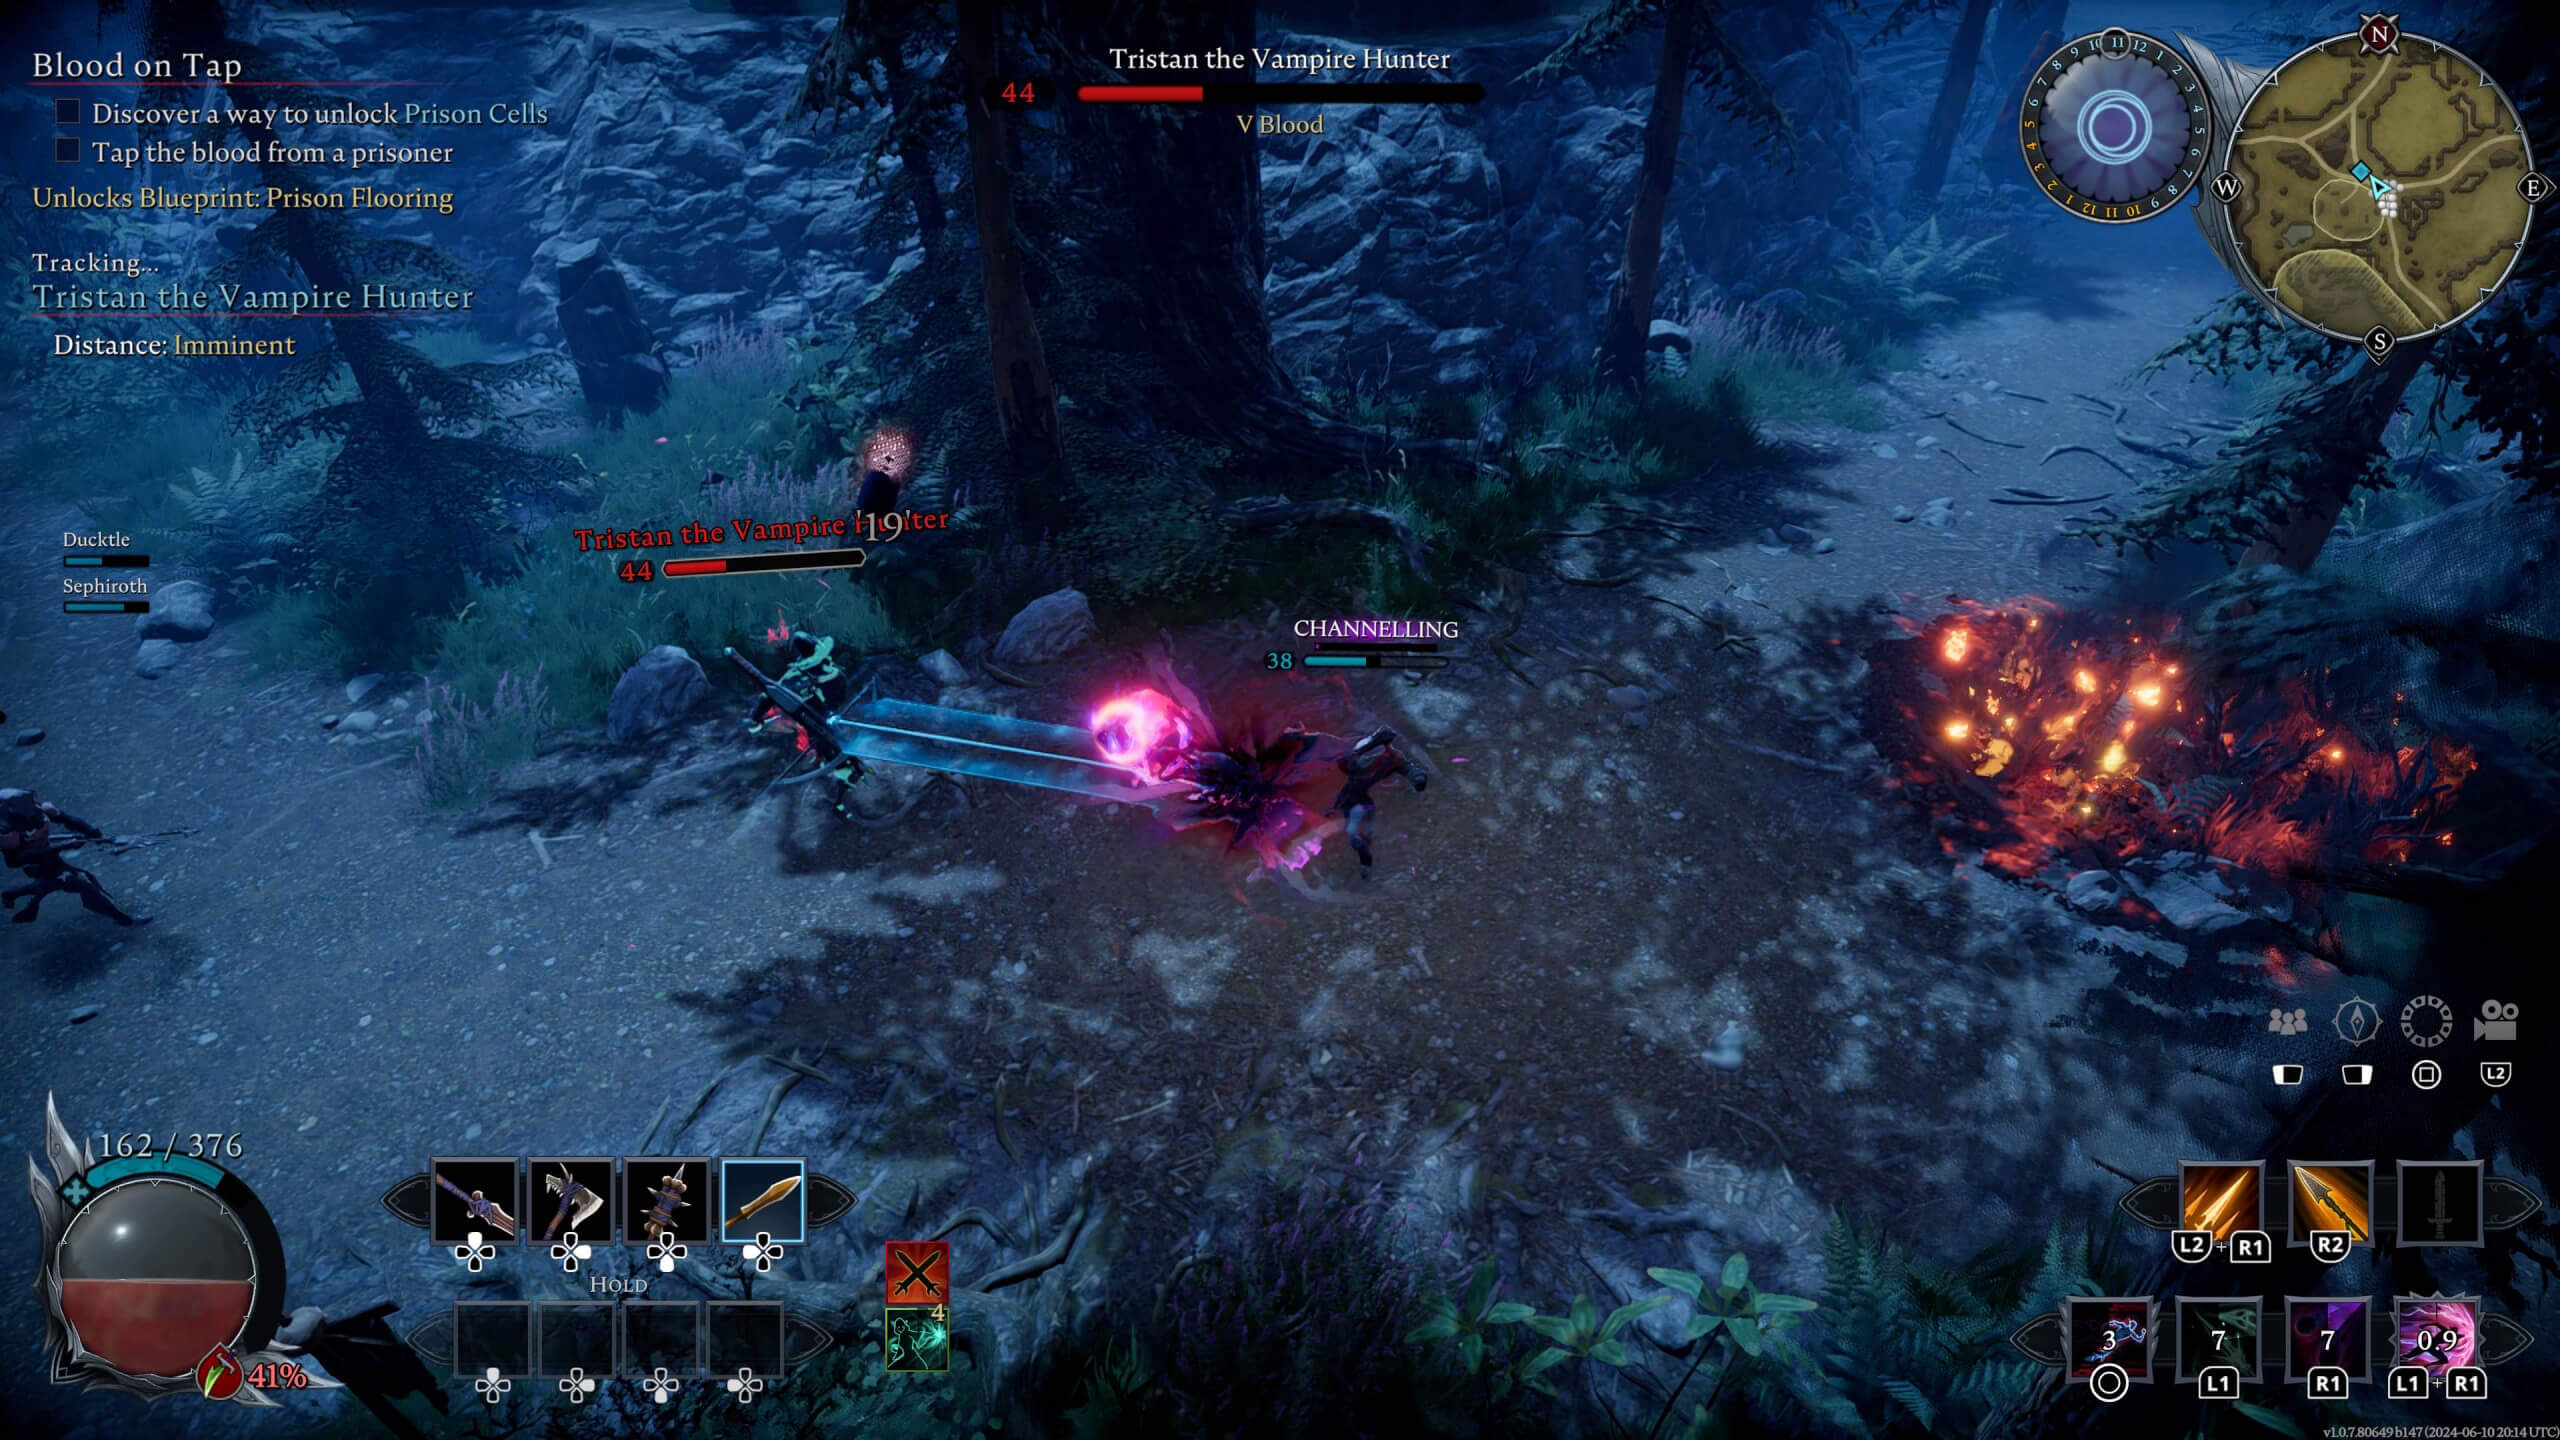 The player killing a character named "Tristan the vampire hunter"